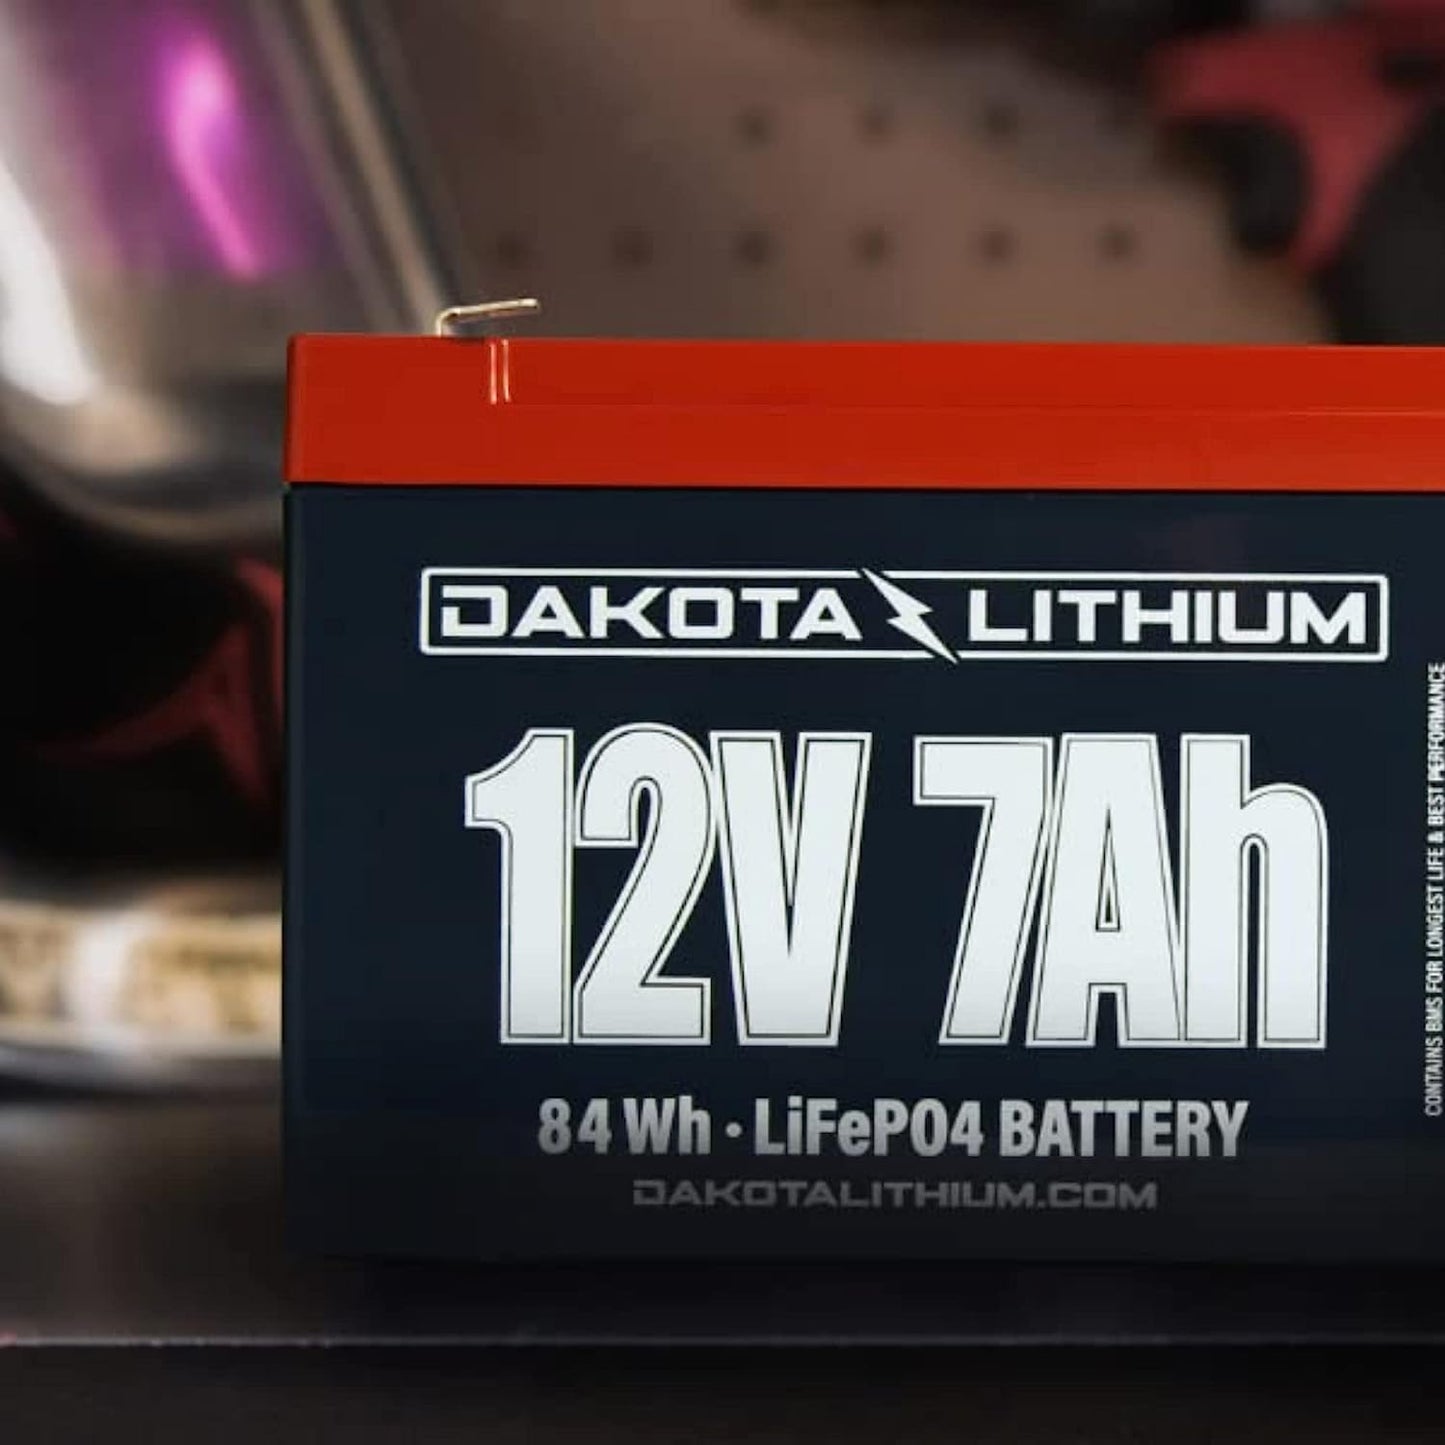 Dakota Lithium – 12V 7Ah LiFePO4 Deep Cycle Battery – 11 Year USA Warranty 2000+ Cycles – Built in BMS – For Ice Fishing, Fish Finders, Outdoor, and More